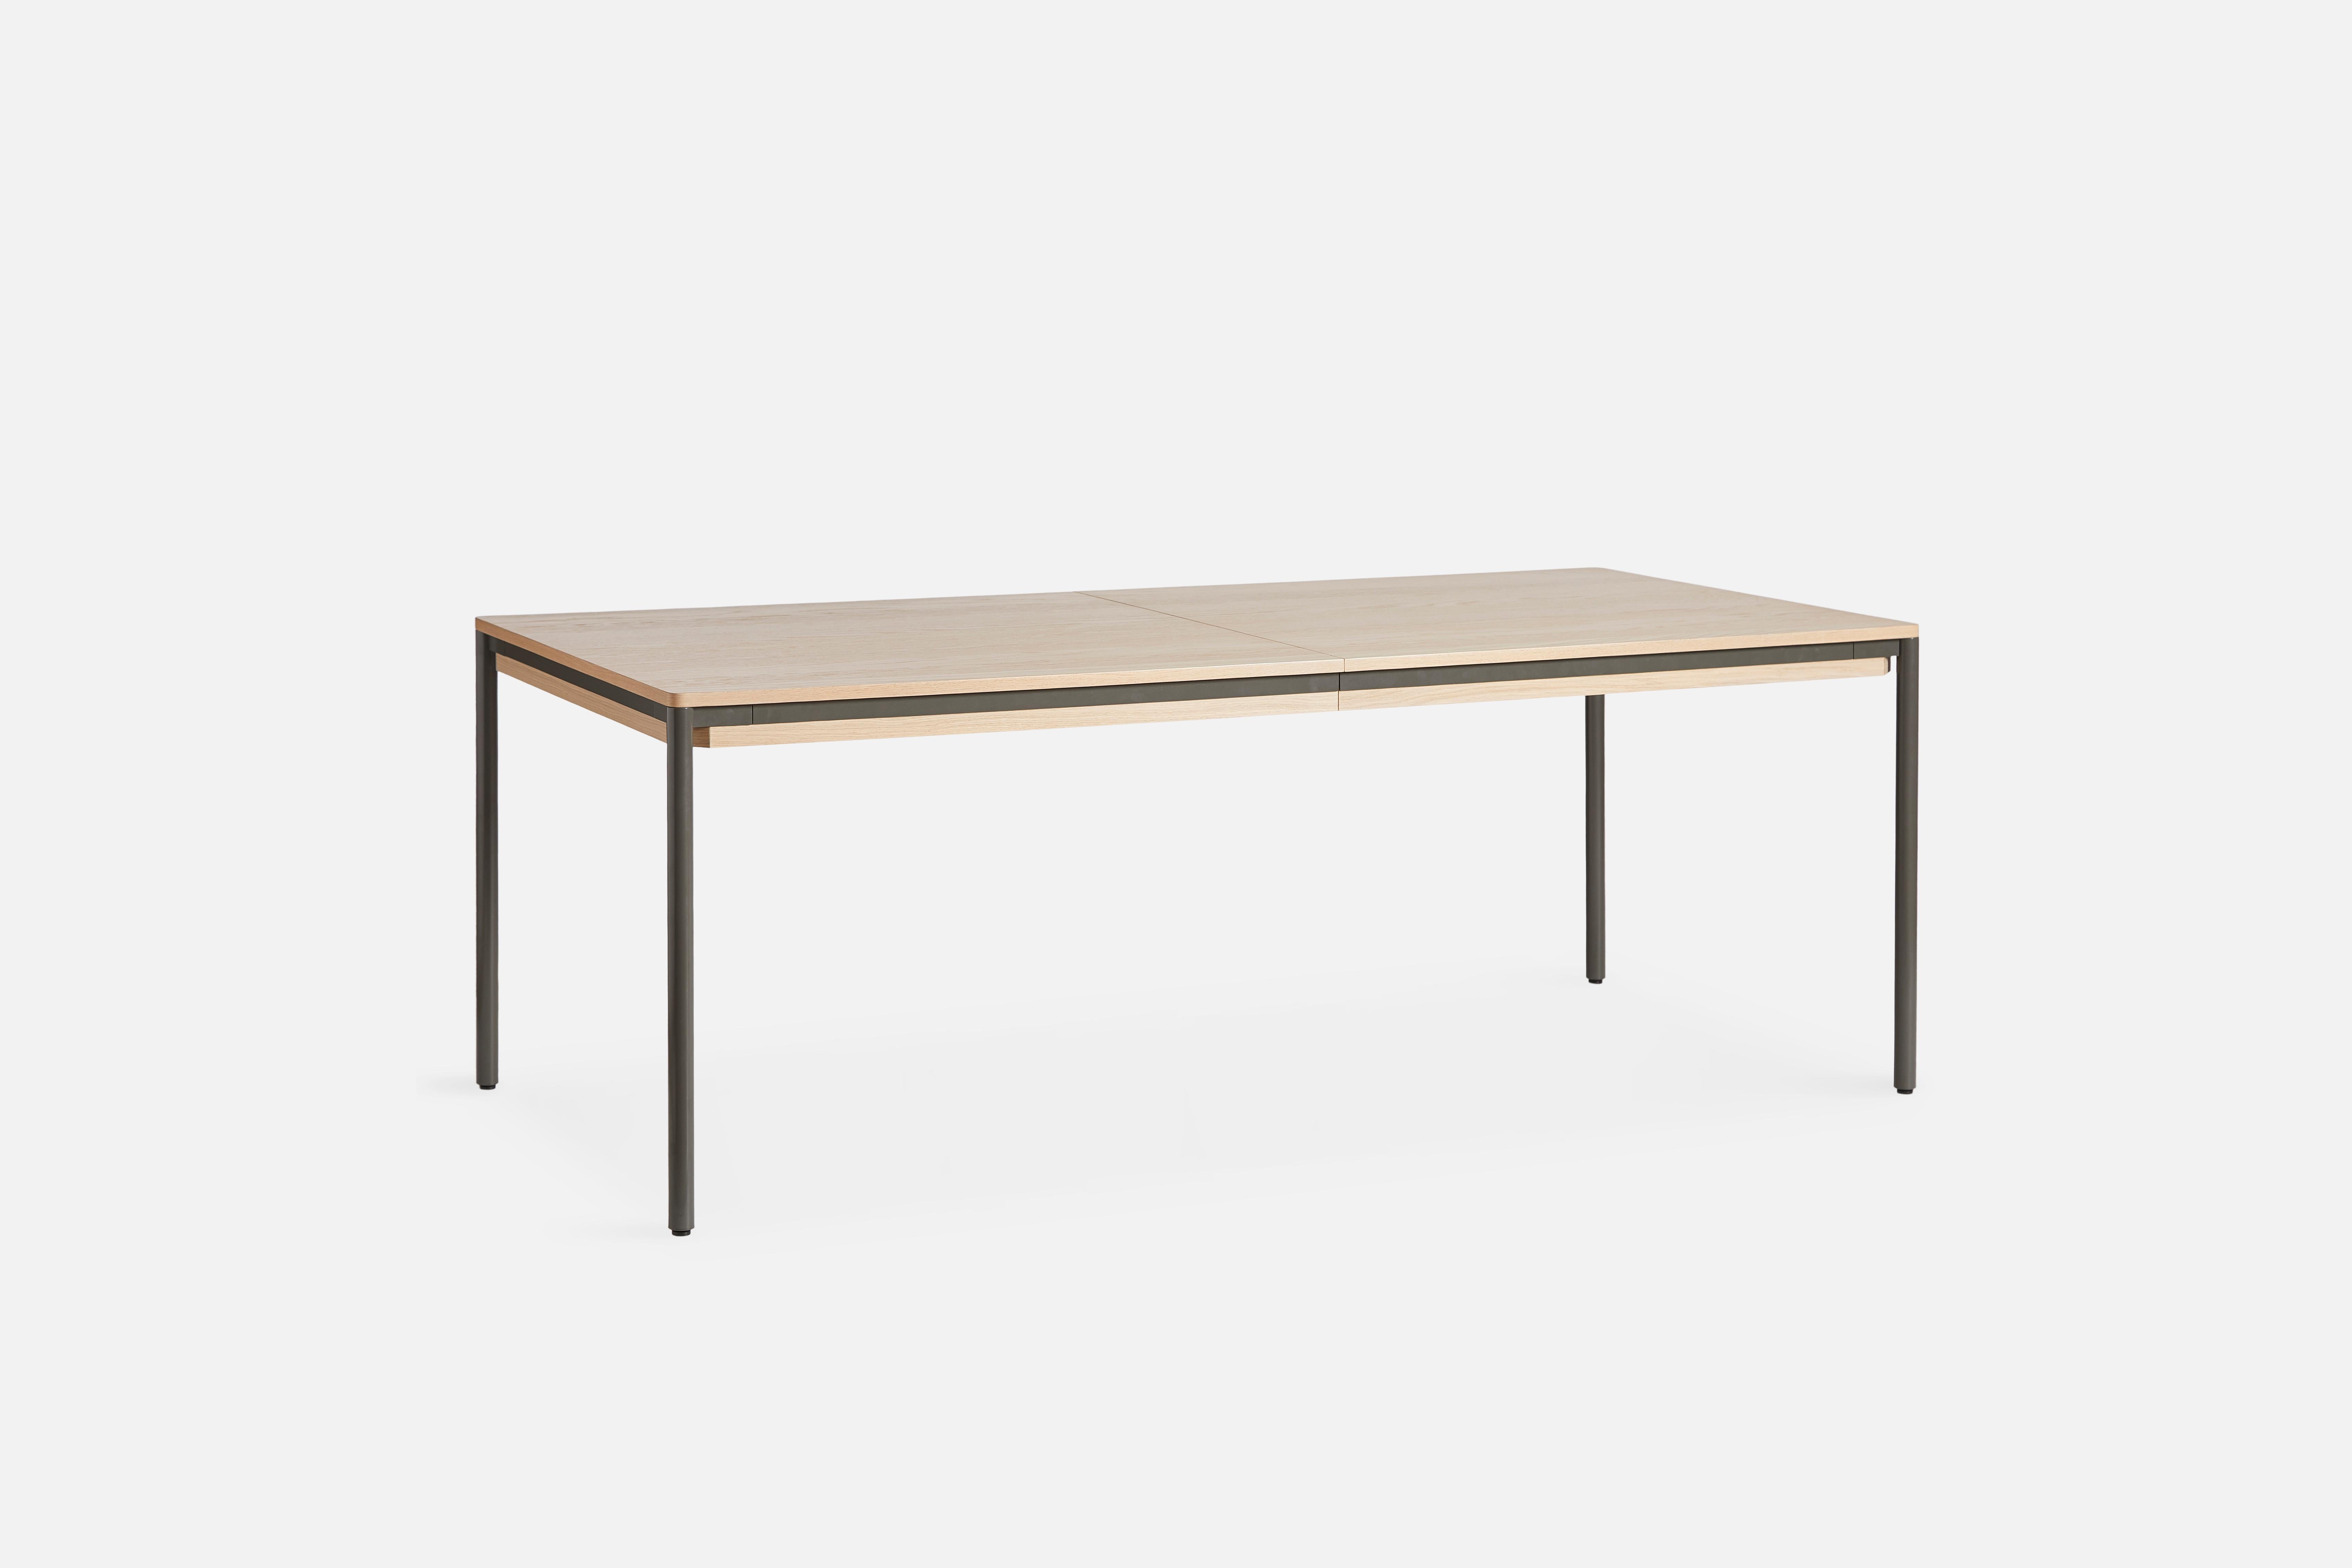 Piezas Extendable Dining Table by Silvia Ceñal
Materials: Lacquer, oak, metal
Dimensions: D 95 x W 200 x H 74 cm
Also available in different sizes. Please contact us. 

The founders, Mia and Torben Koed, decided to put their 30 years of